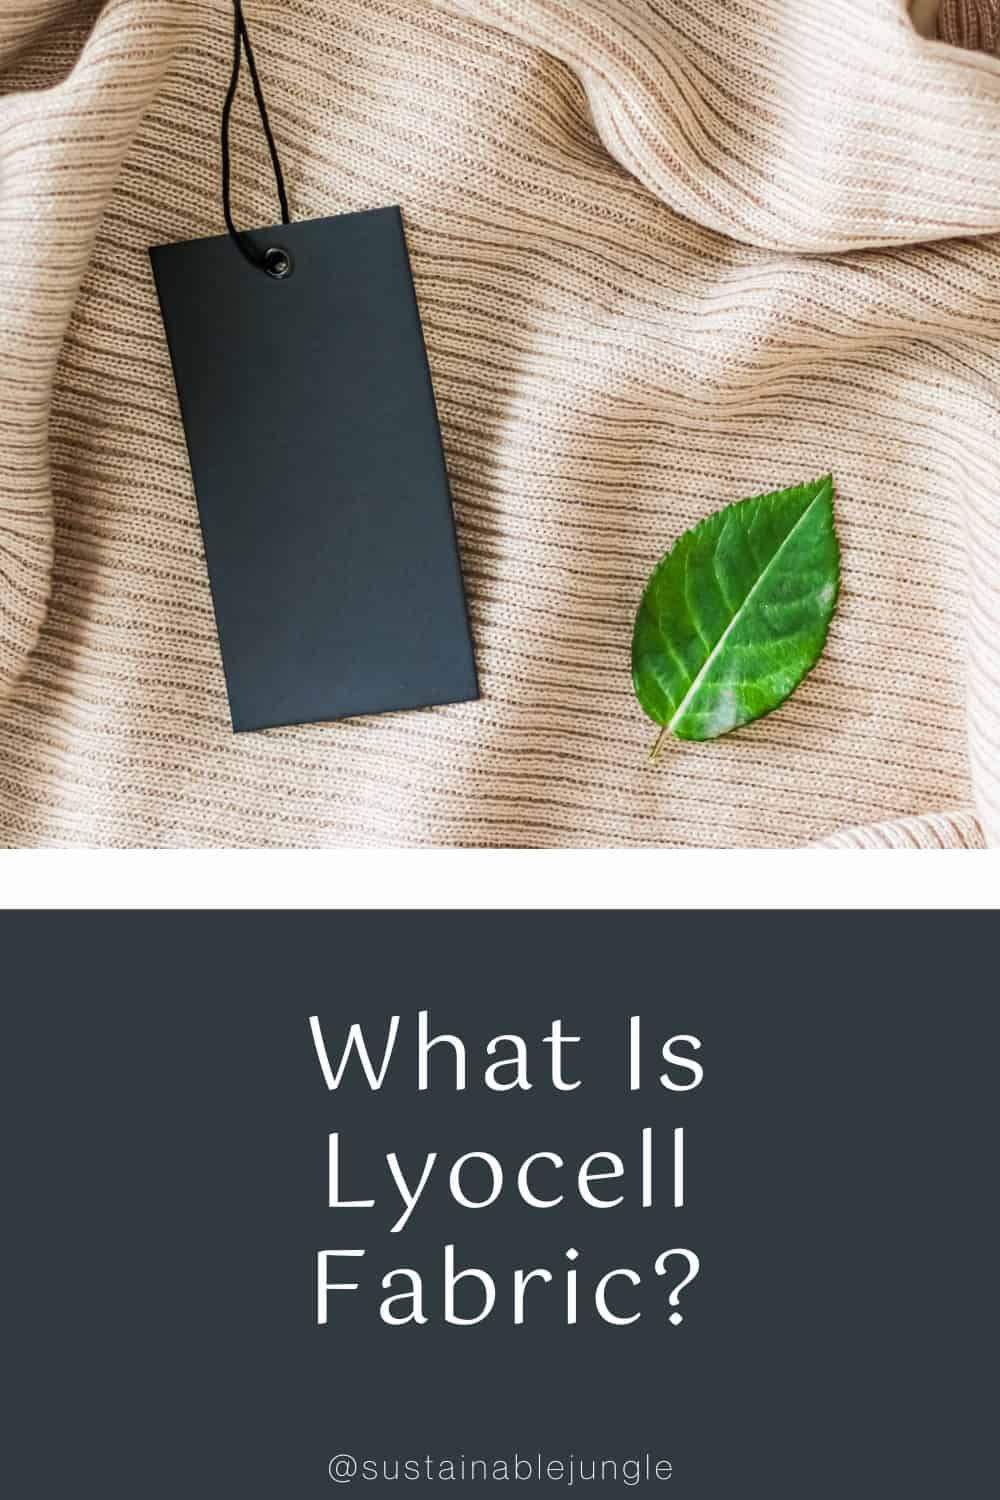 What Is Lyocell Fabric & Is Its Sustainability Up To Snuff? #lyocellfabric #lyocelltencelfabric #islyocellfabricsustainable #tencellyocell #whatislyocellfabric #sustainablejungle Image by Annaleven via Canva Pro